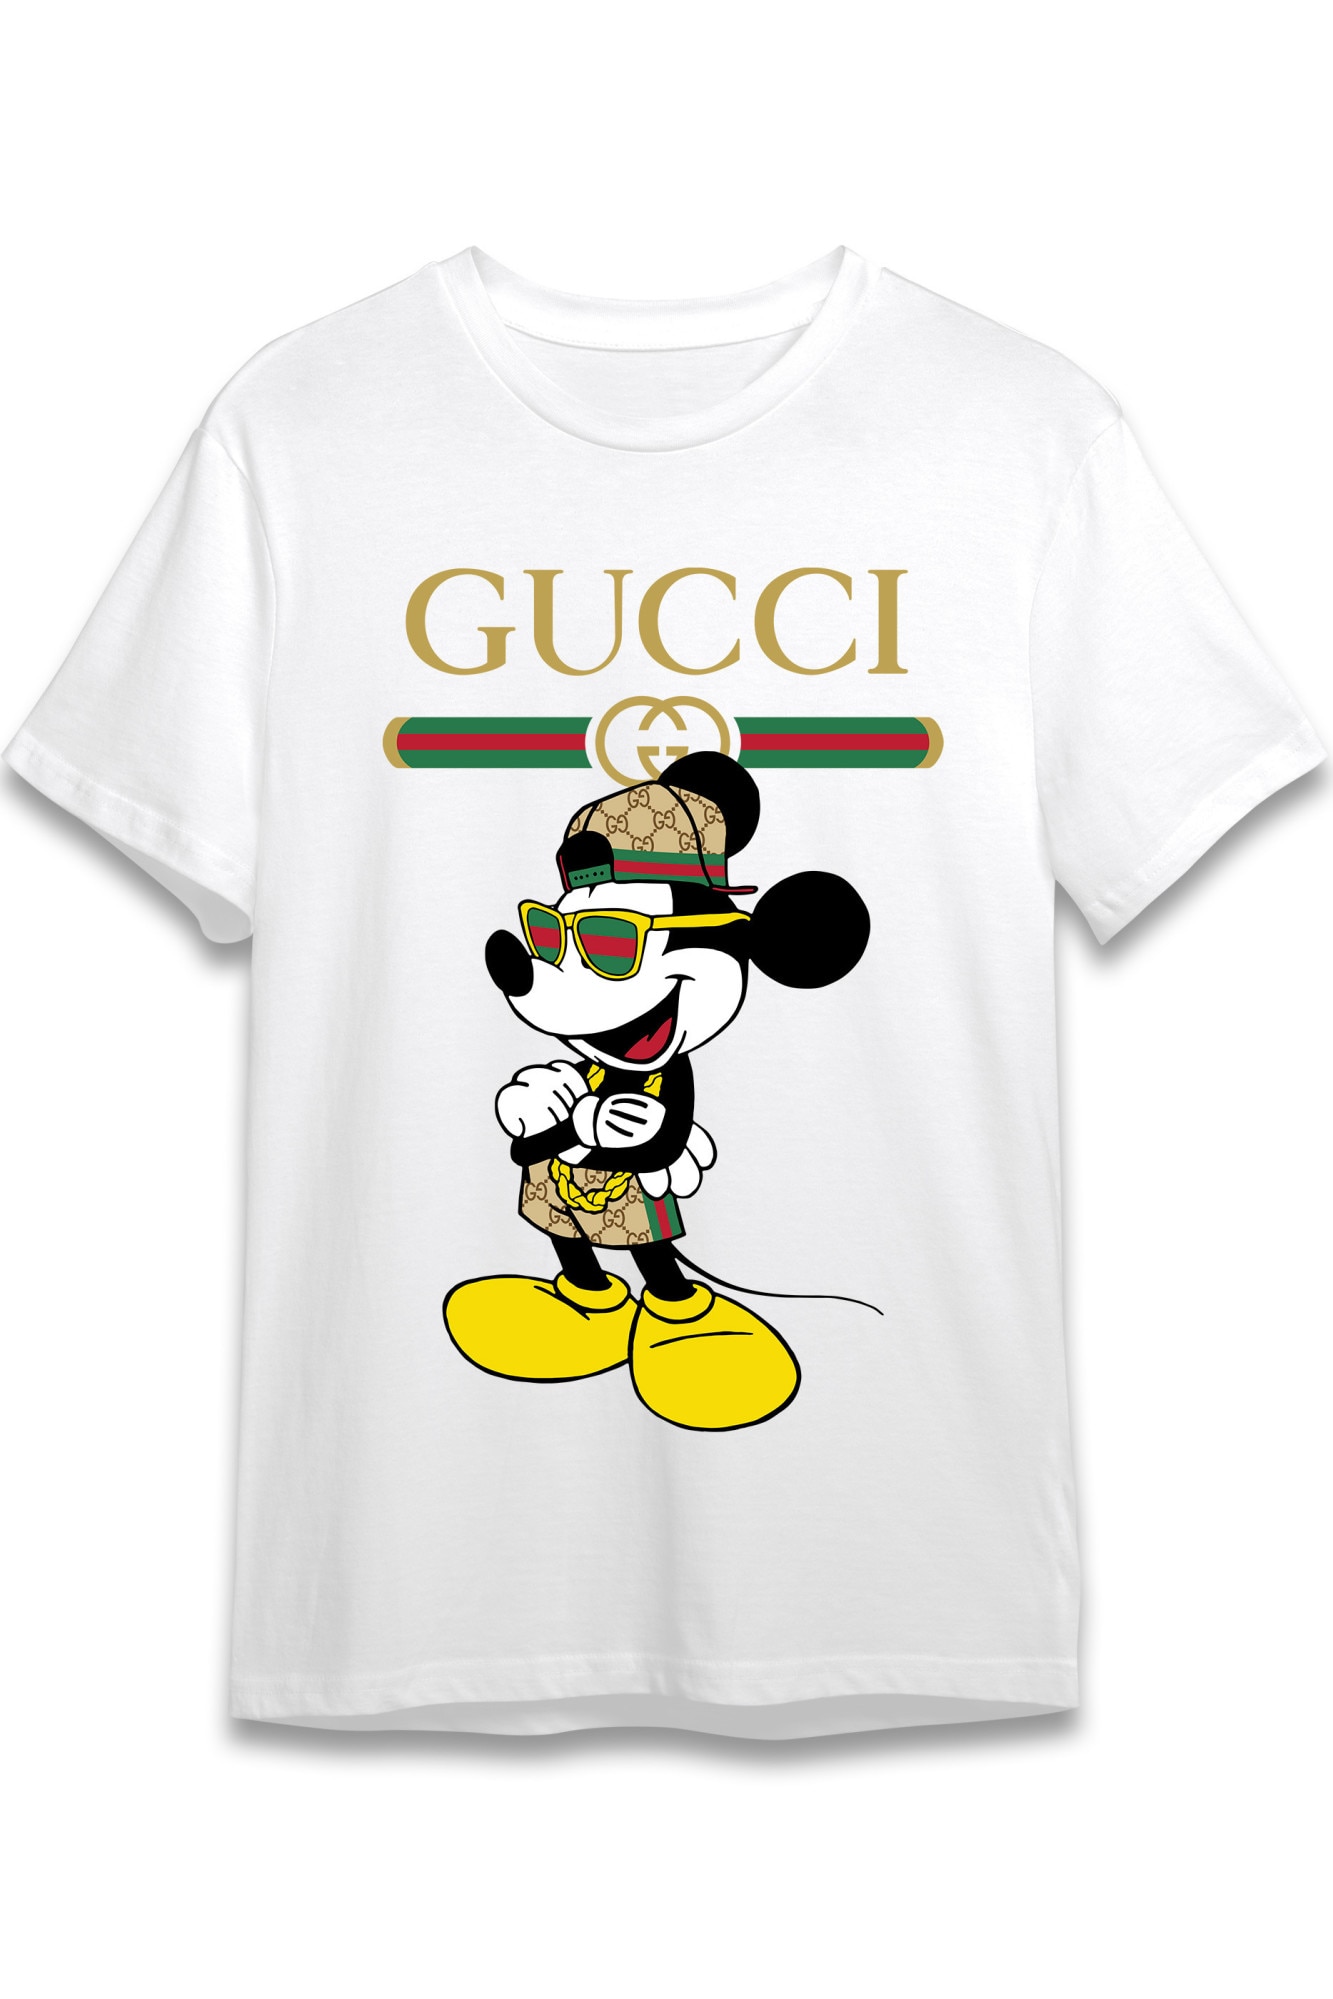 Required Agriculture wheat Tricou Mickey Mouse Rapper in Haine Gucci, Parodie Gucci, Unisex, 100%  Bumbac, Alb, L - eMAG.ro